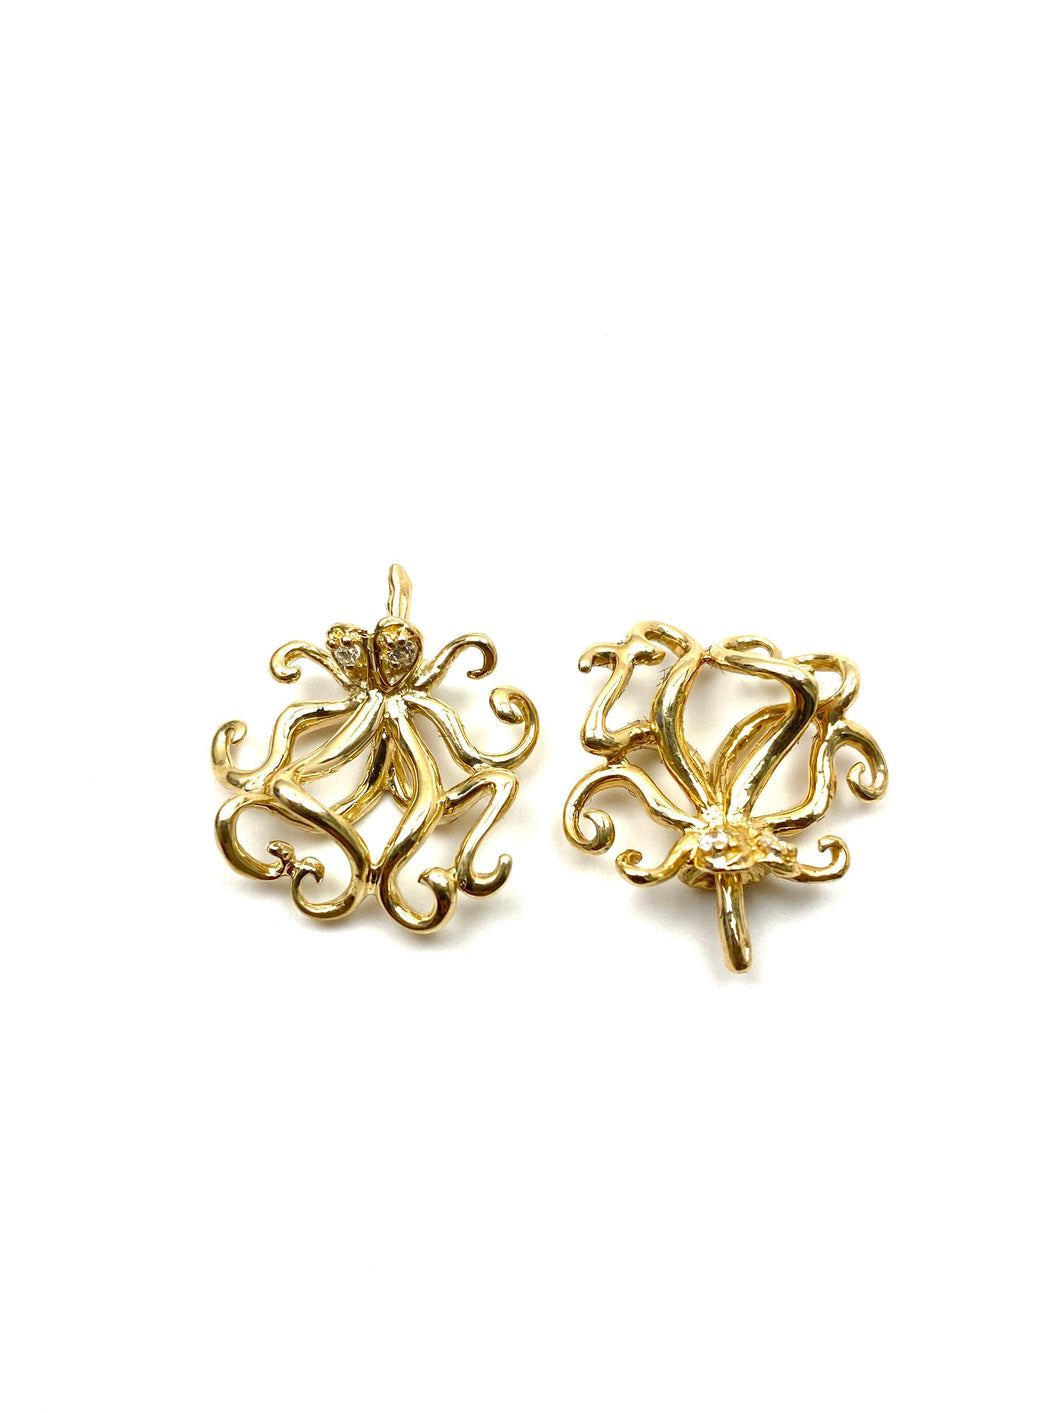 14K solid white gold, gold and rose gold octopus setting , SKU# JPP-964